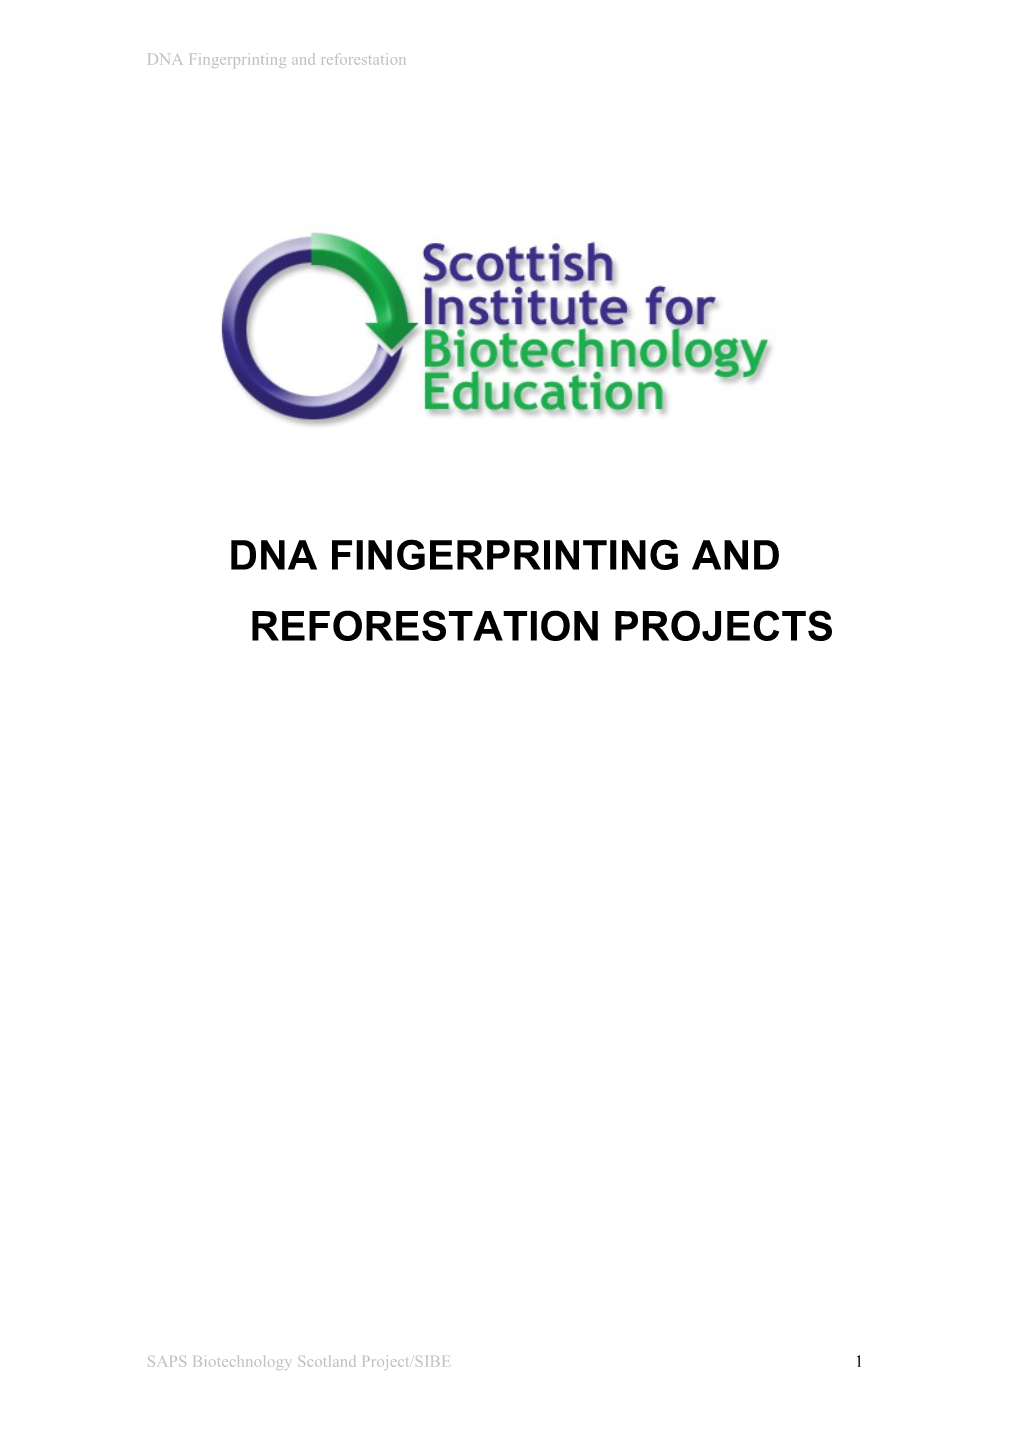 Dna Fingerprinting and Reforestation Projects